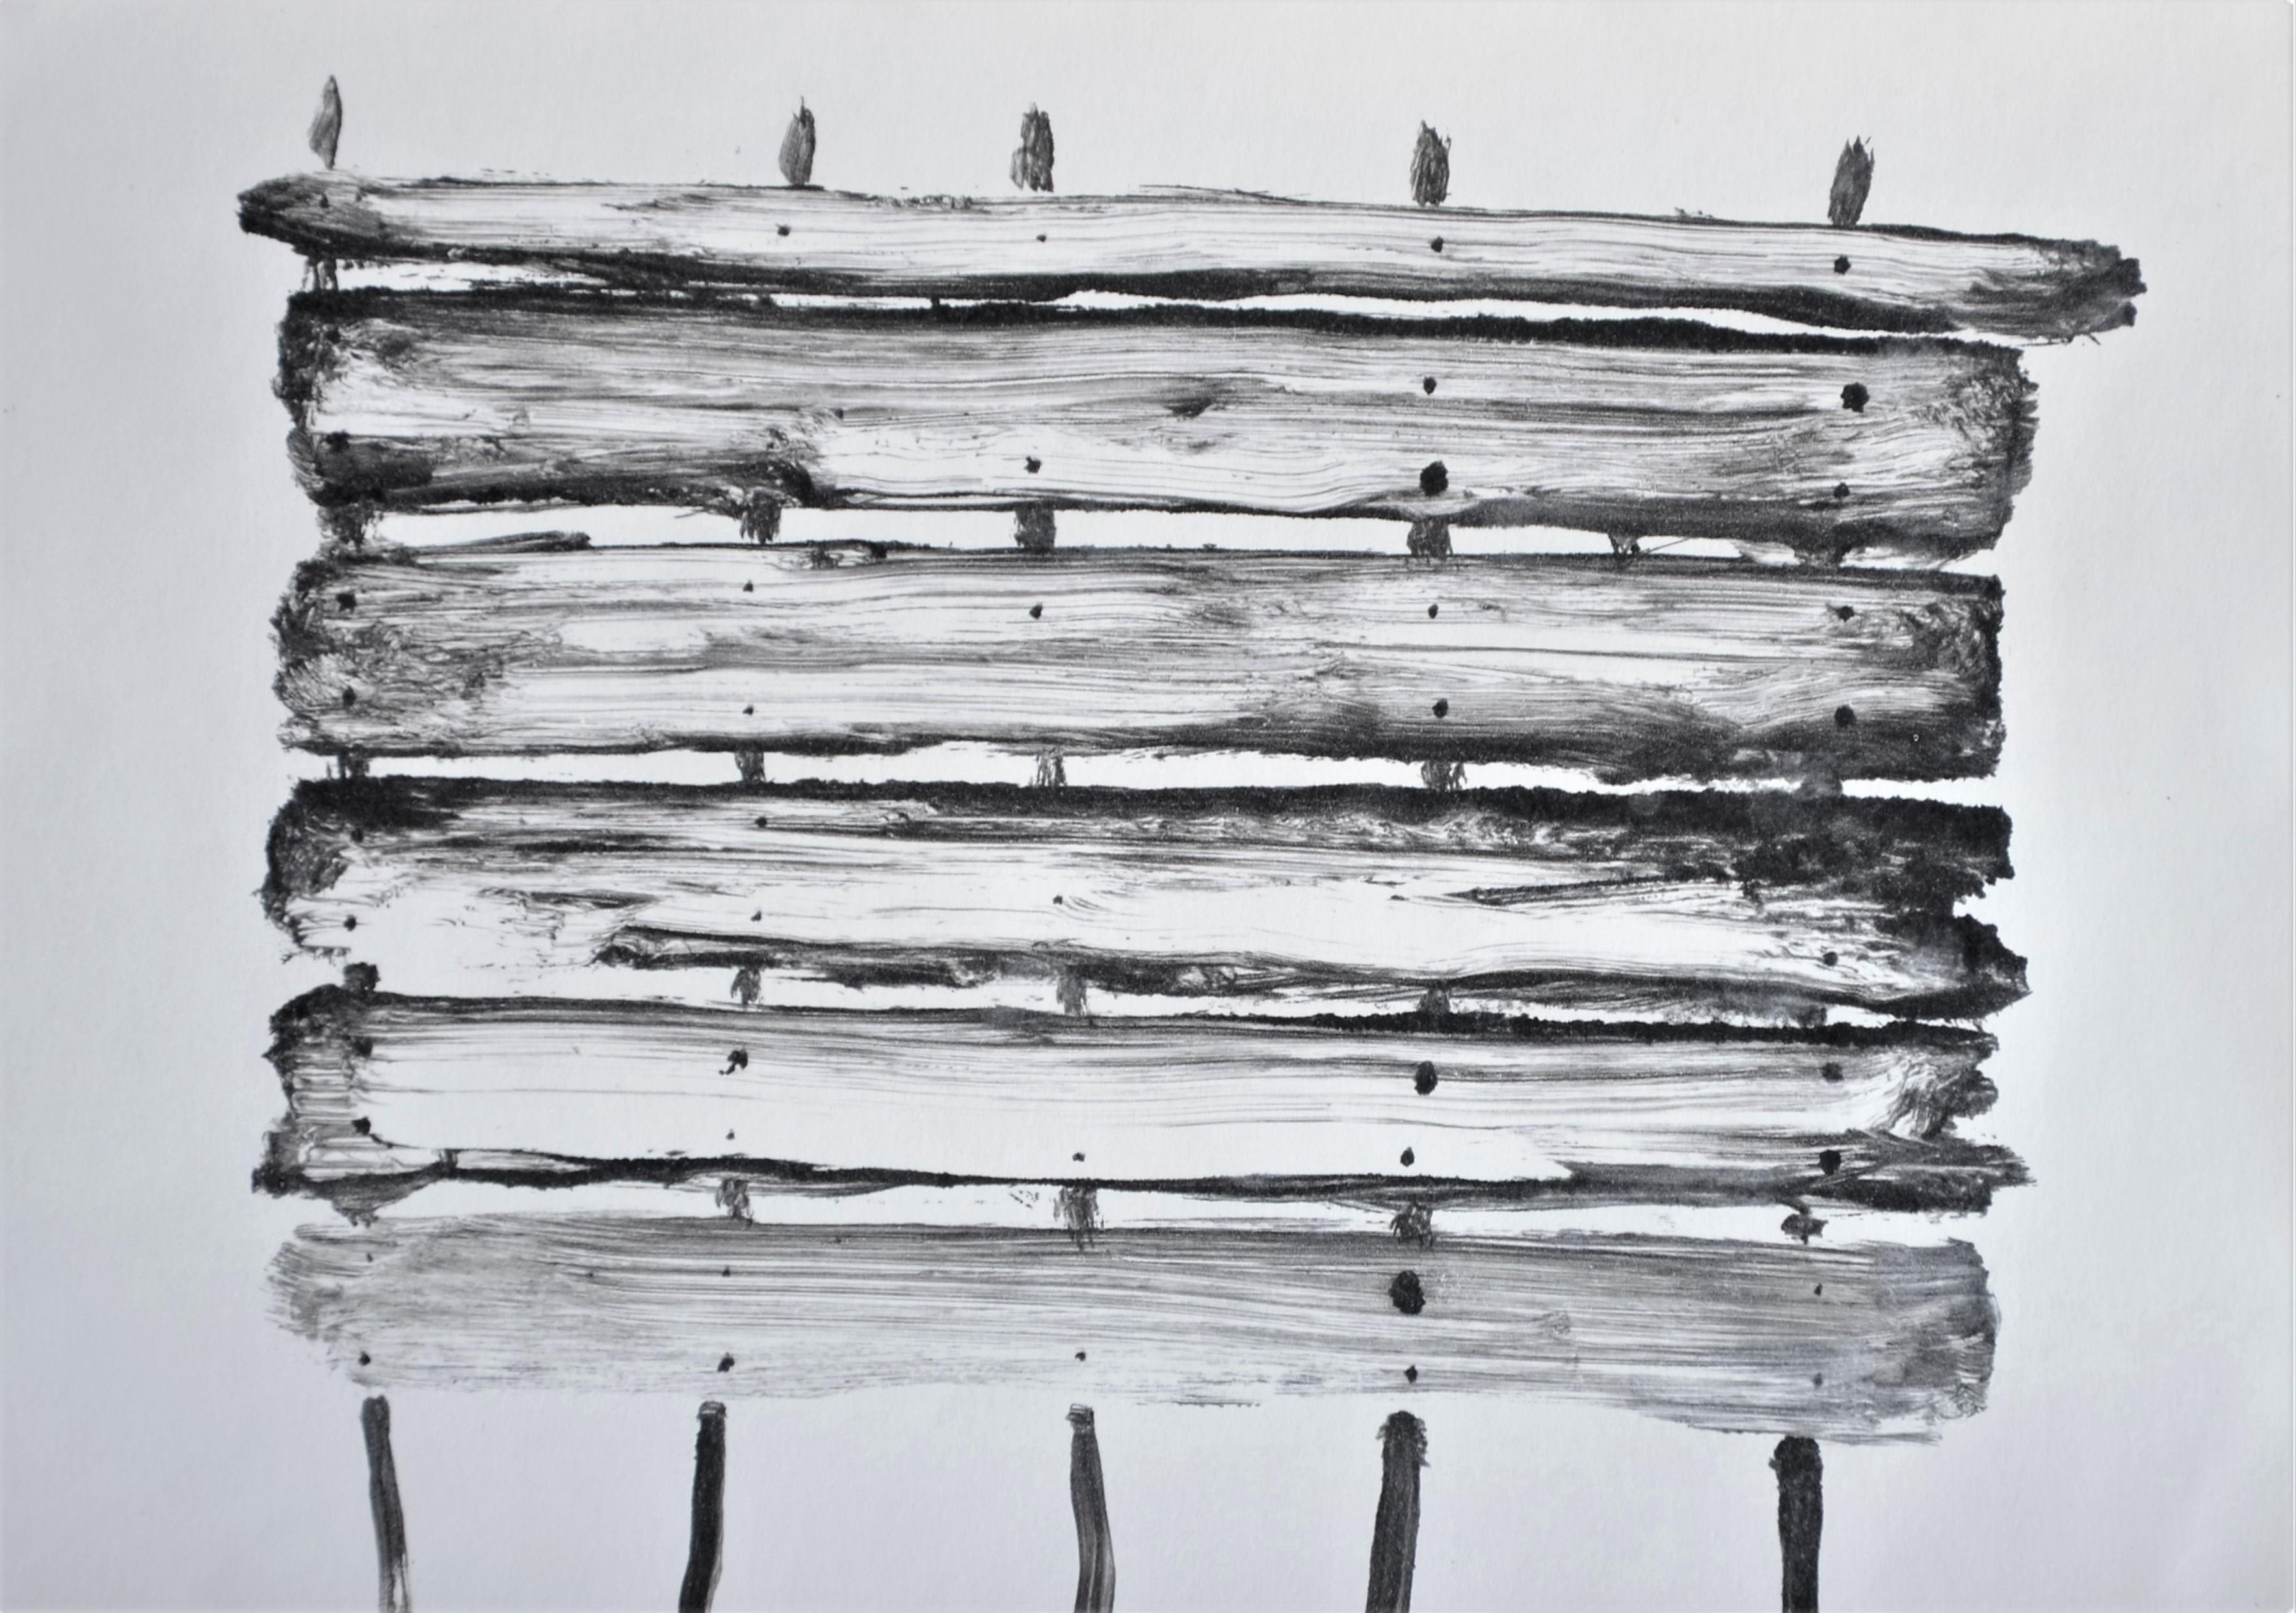 Artist Jasper Hagenaar made unique monotypes. The monoprints are works in black acrylic paint pressed on paper (21 x 29,5 cm) based upon previous paintings. This a a work of a wooden fence in a landscape. Signed on the back.

Over the last decade